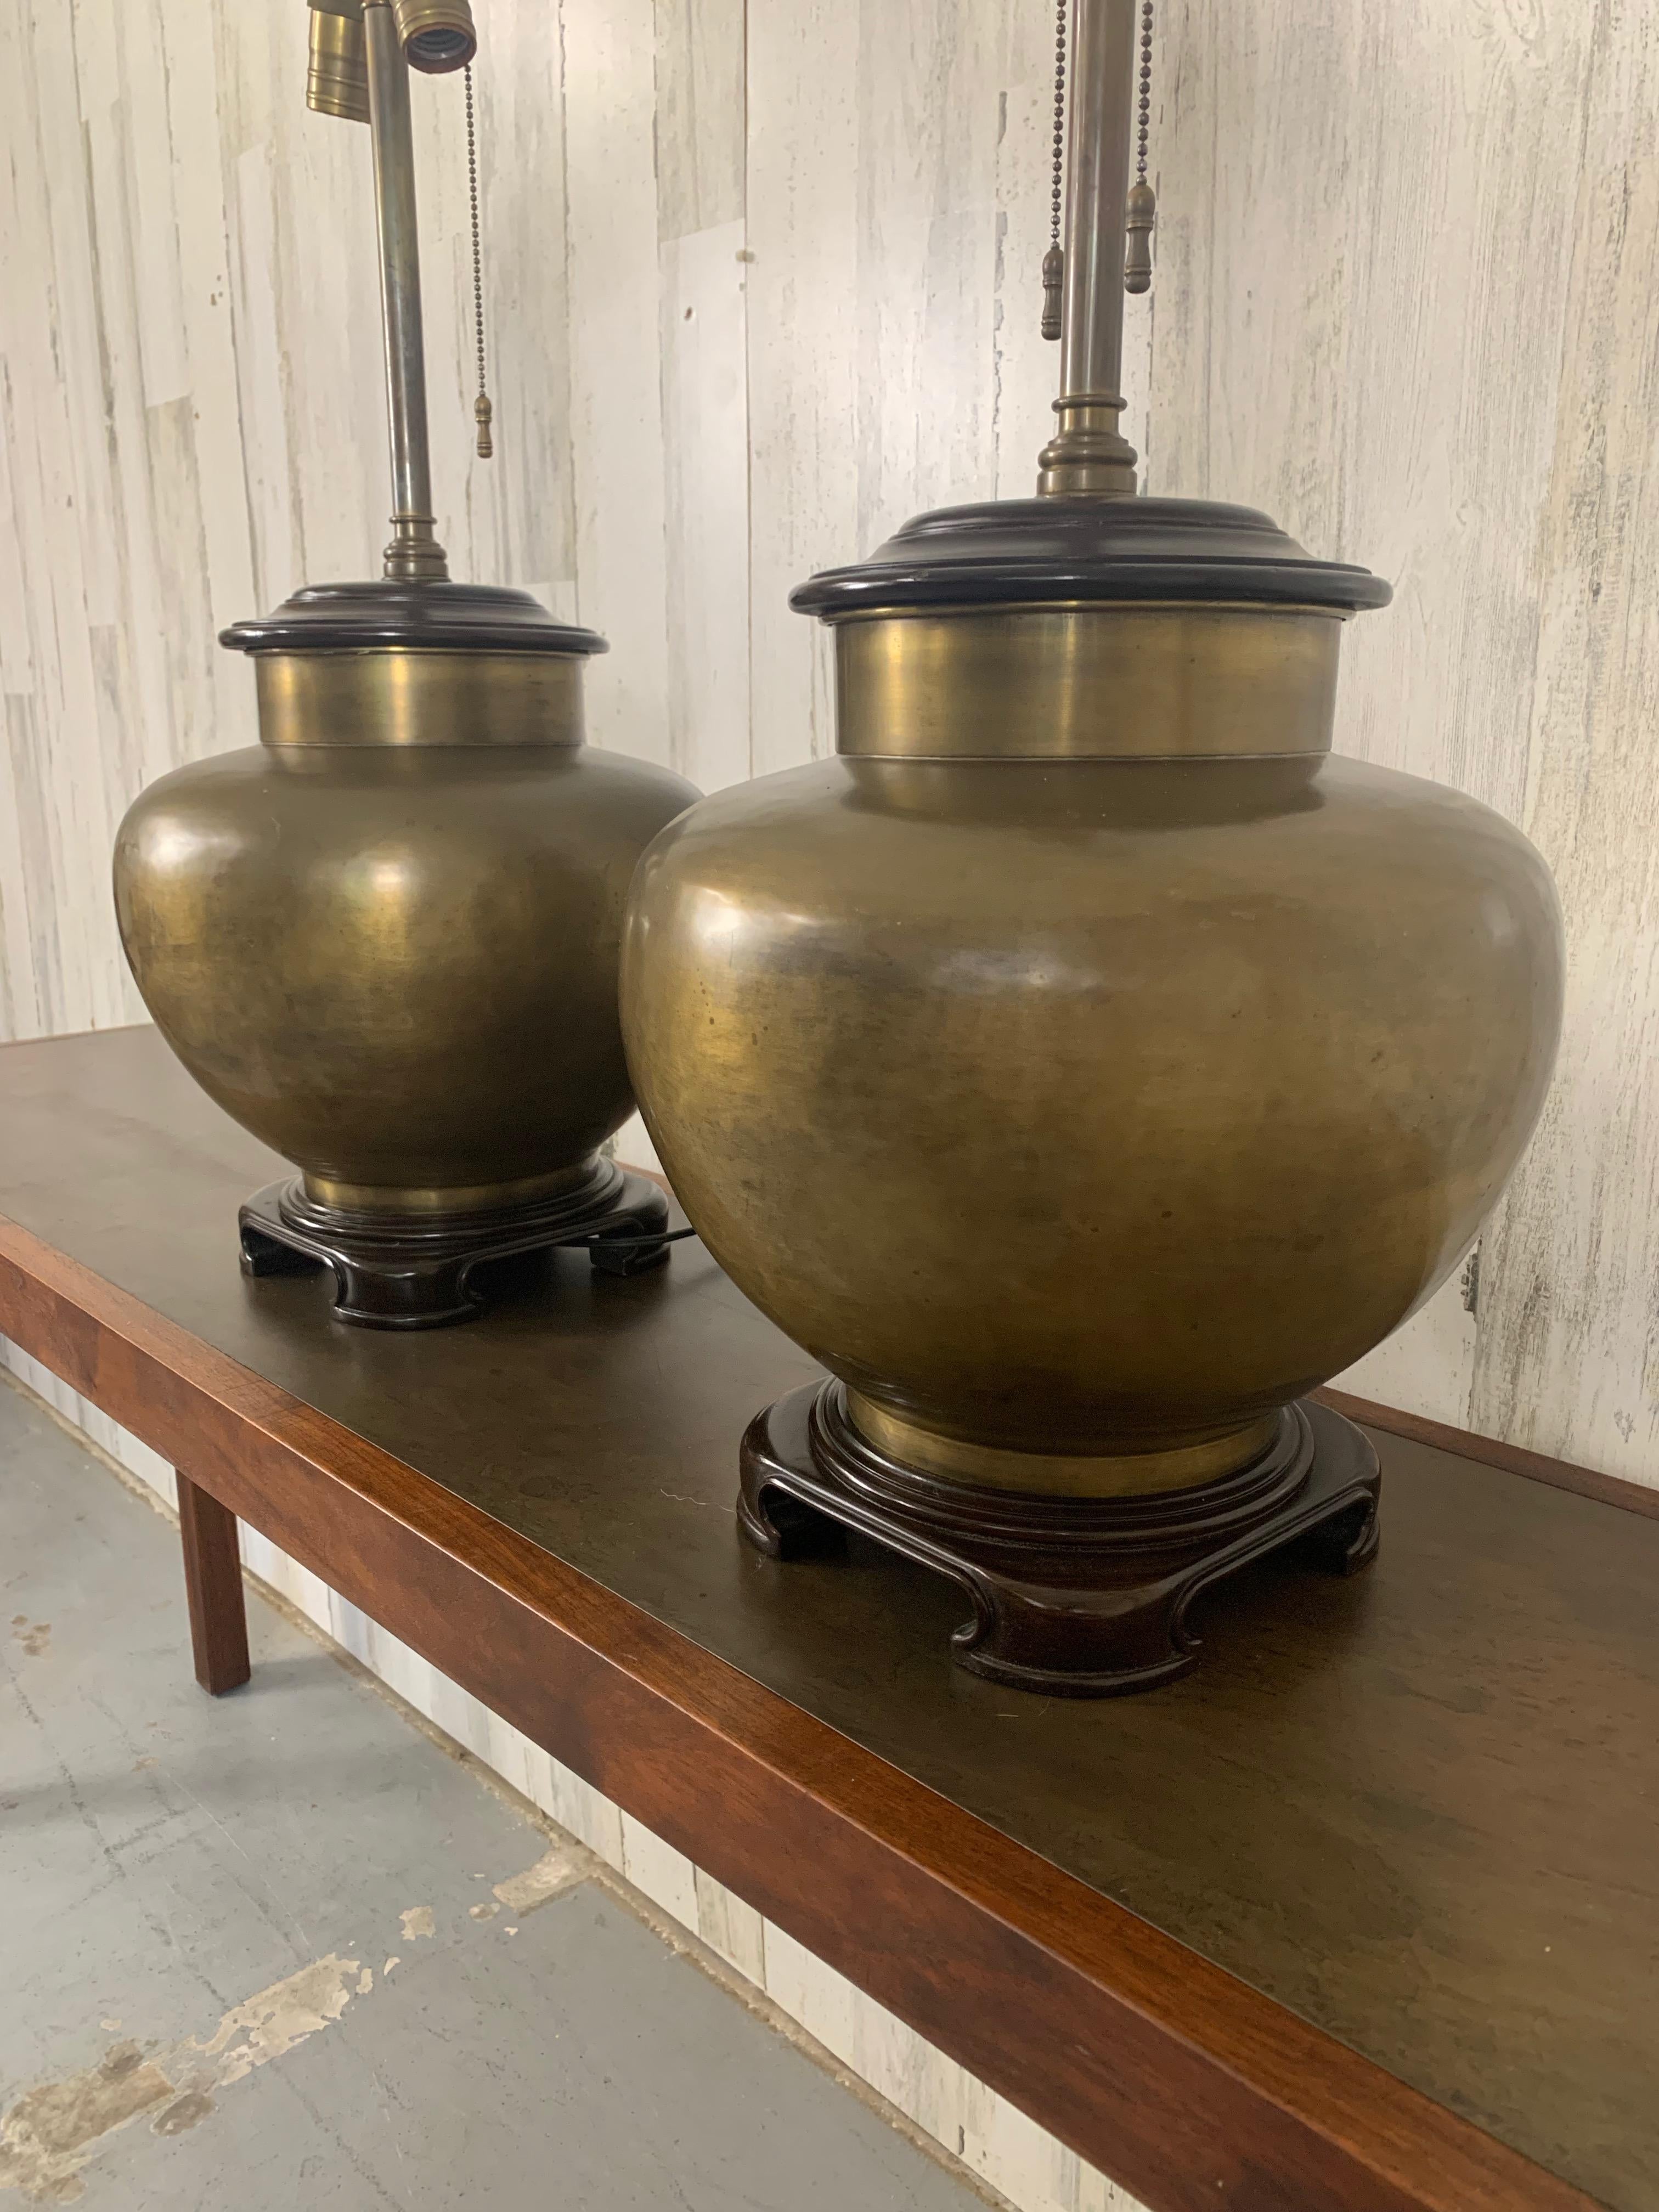 Nice pair of vintage brass with wood plinth and cap ginger jar table lamps.
The patina on the brass and wood give it a great vintage presence. 
There are no shades included.